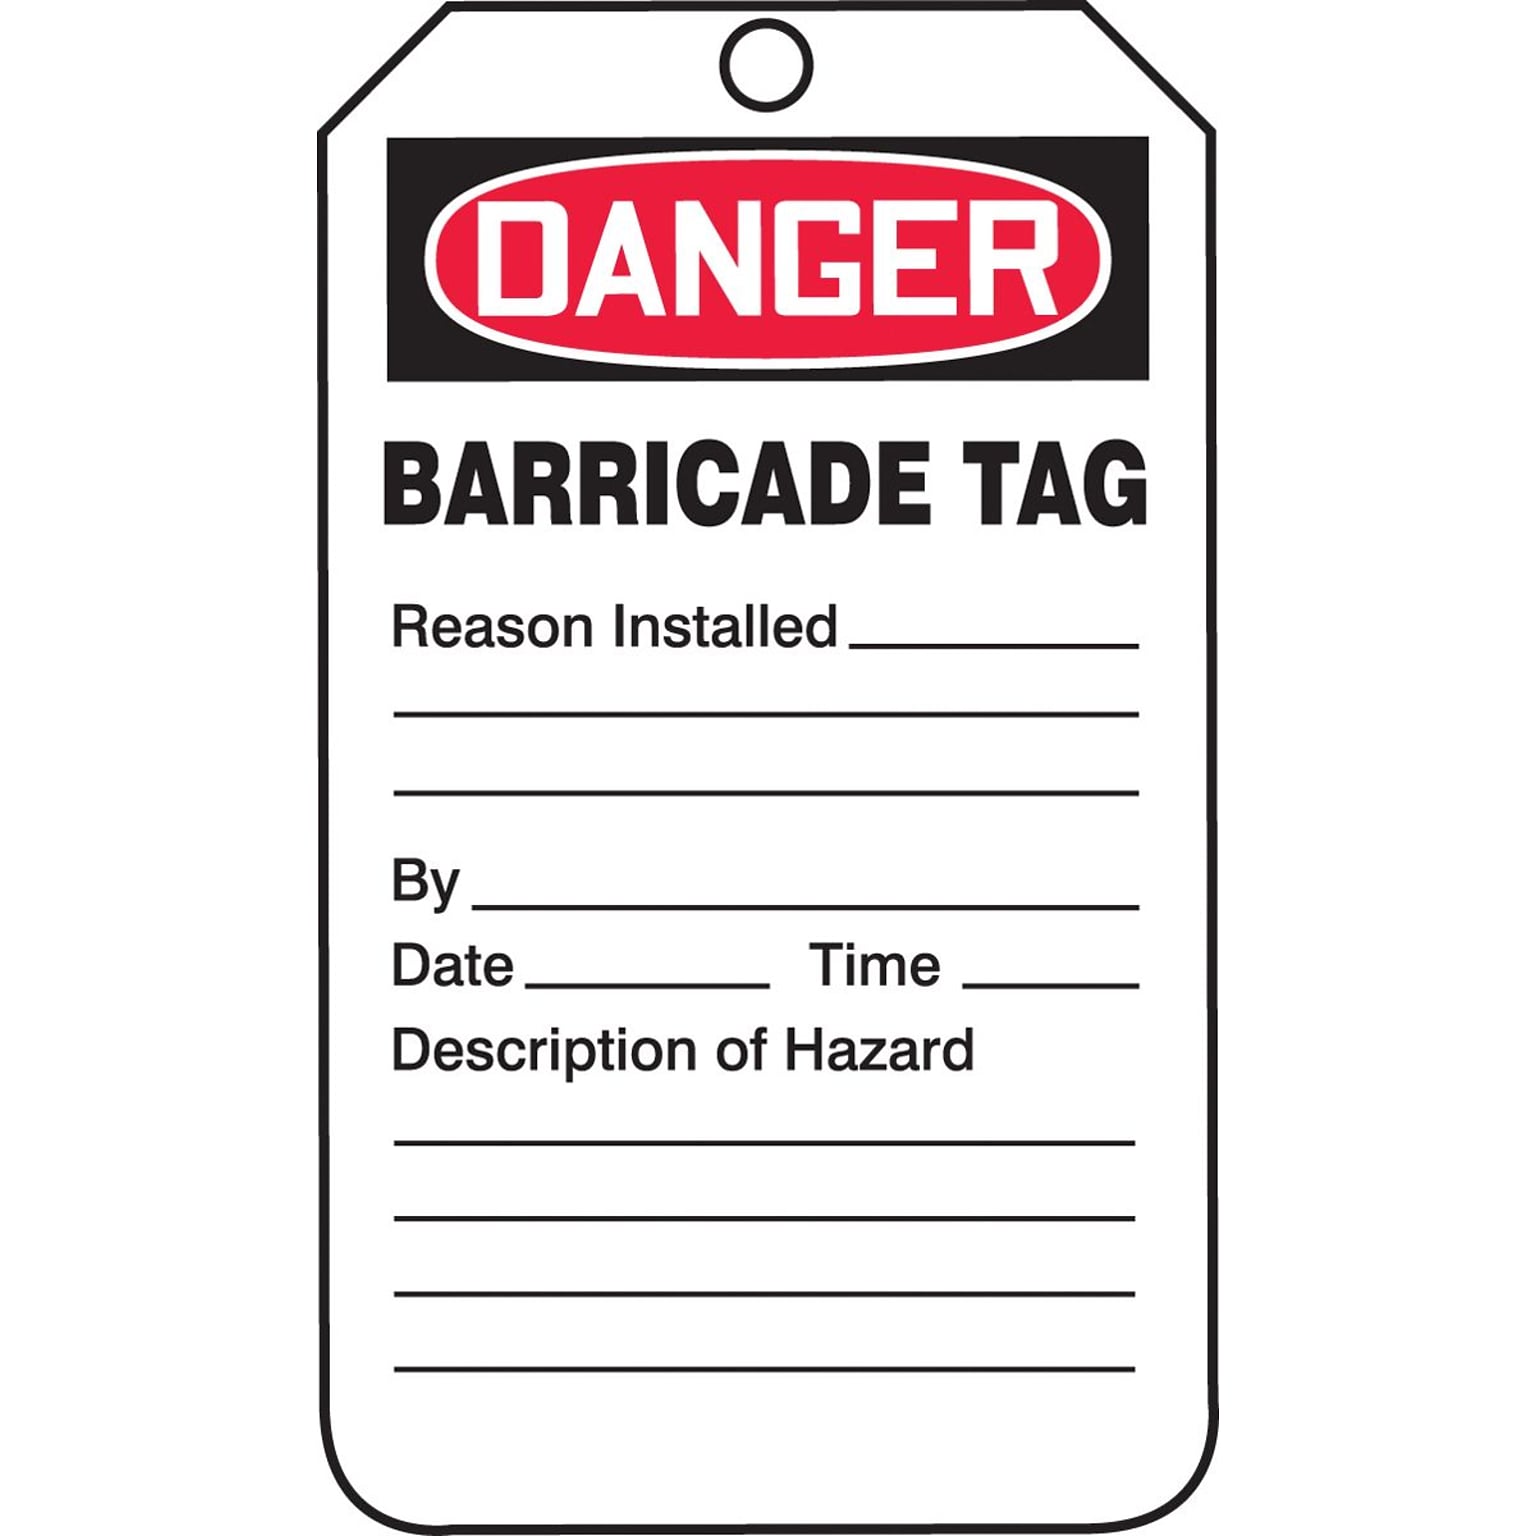 Accuform 5 3/4 x 3 1/4 PF-Cardstock Barricade Tag DANGER BARRICADE.., Red/Black On White, 25/Pack (TAB104CTP)